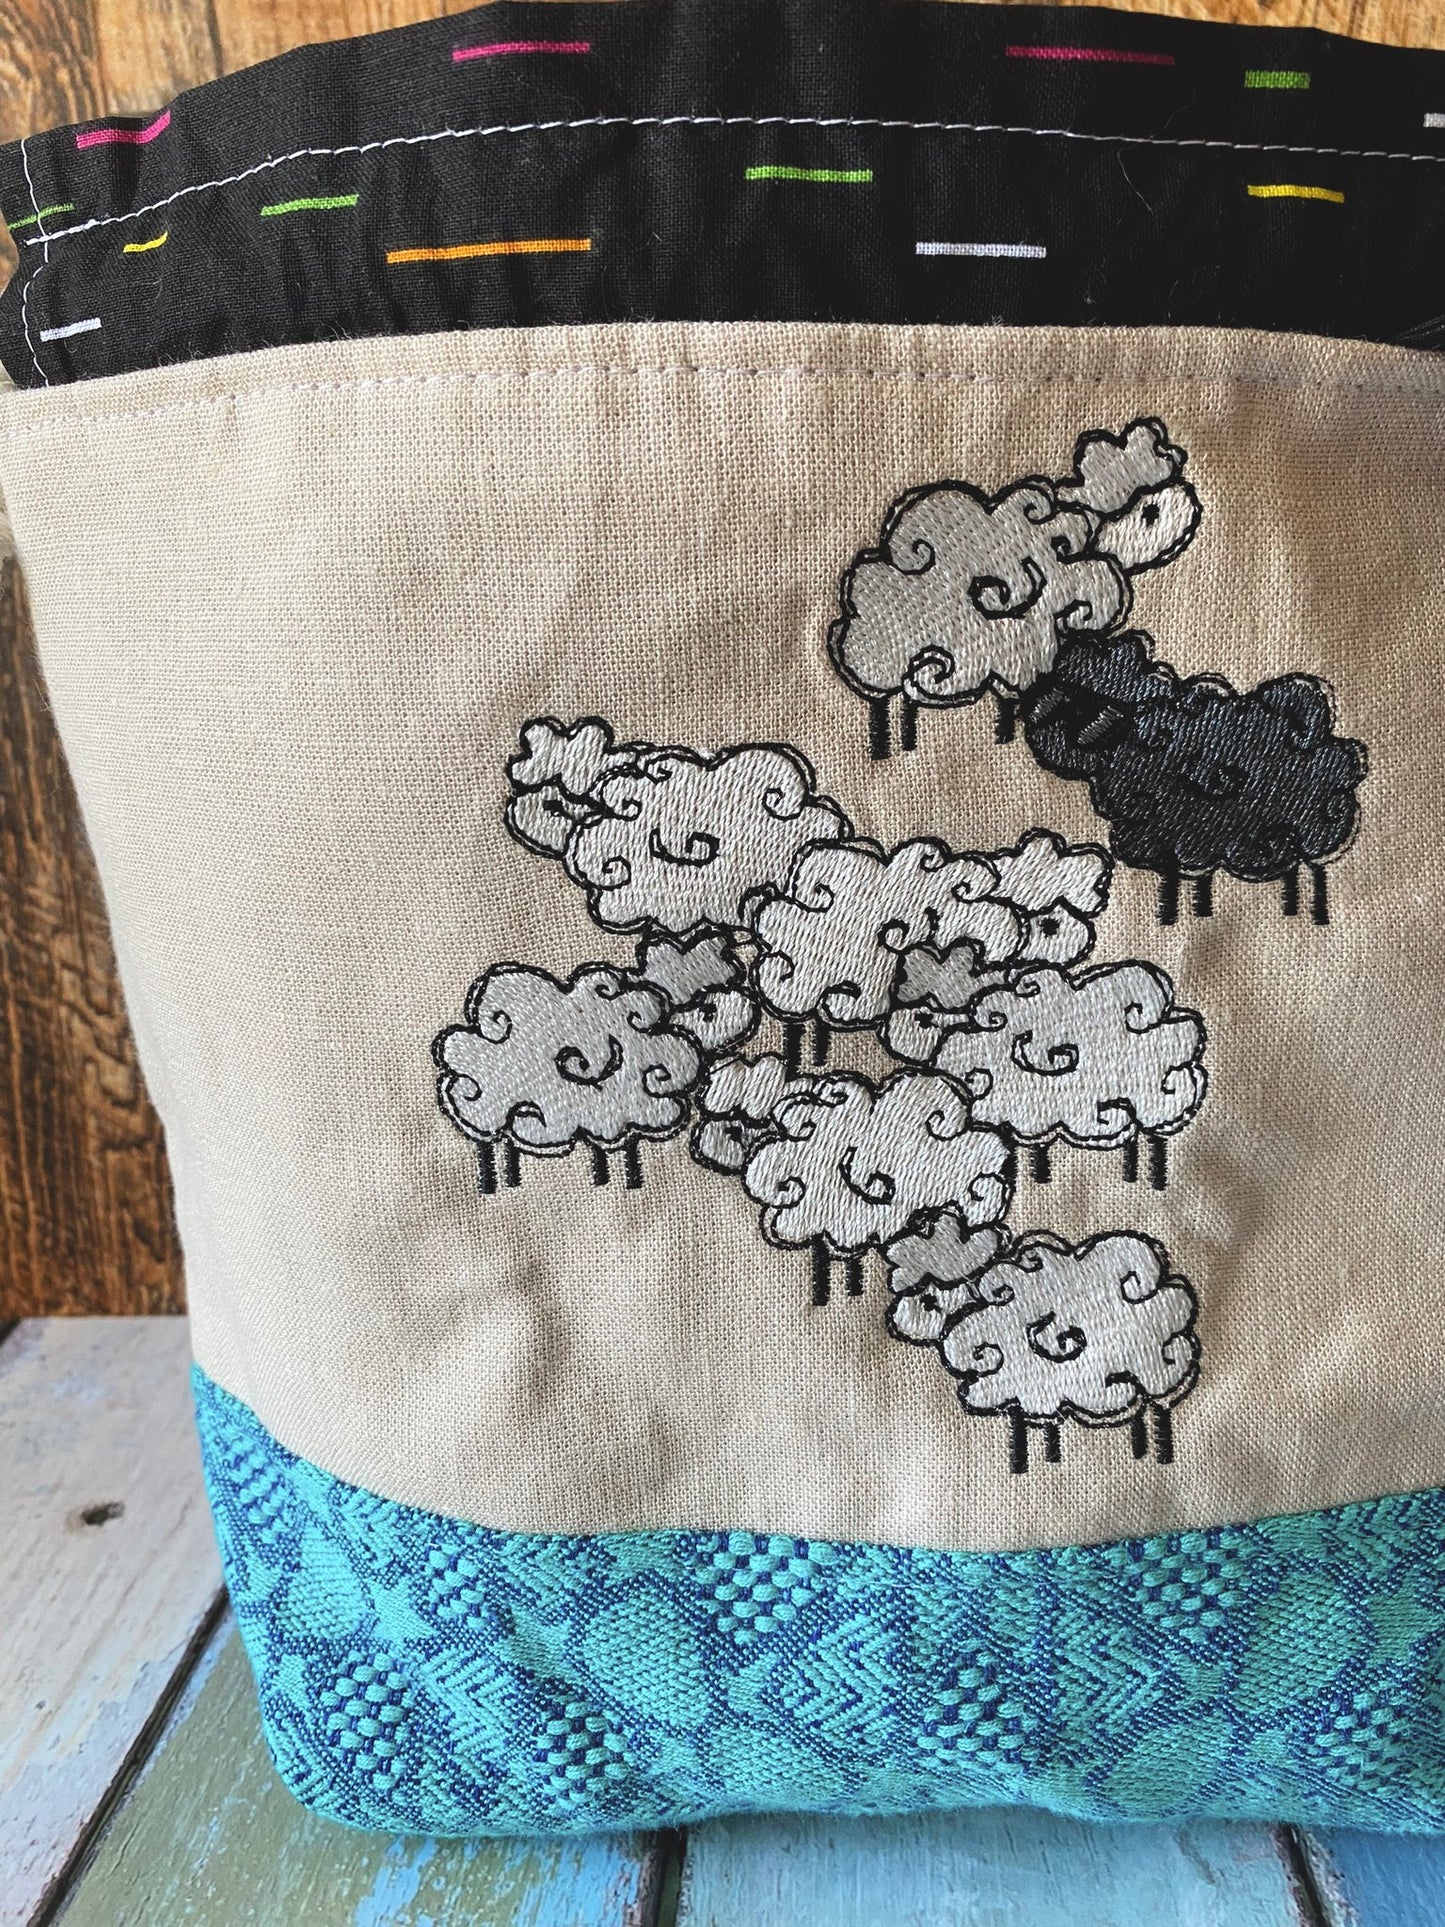 Crochet Forever and Sheep Embroidery Small Project Bag